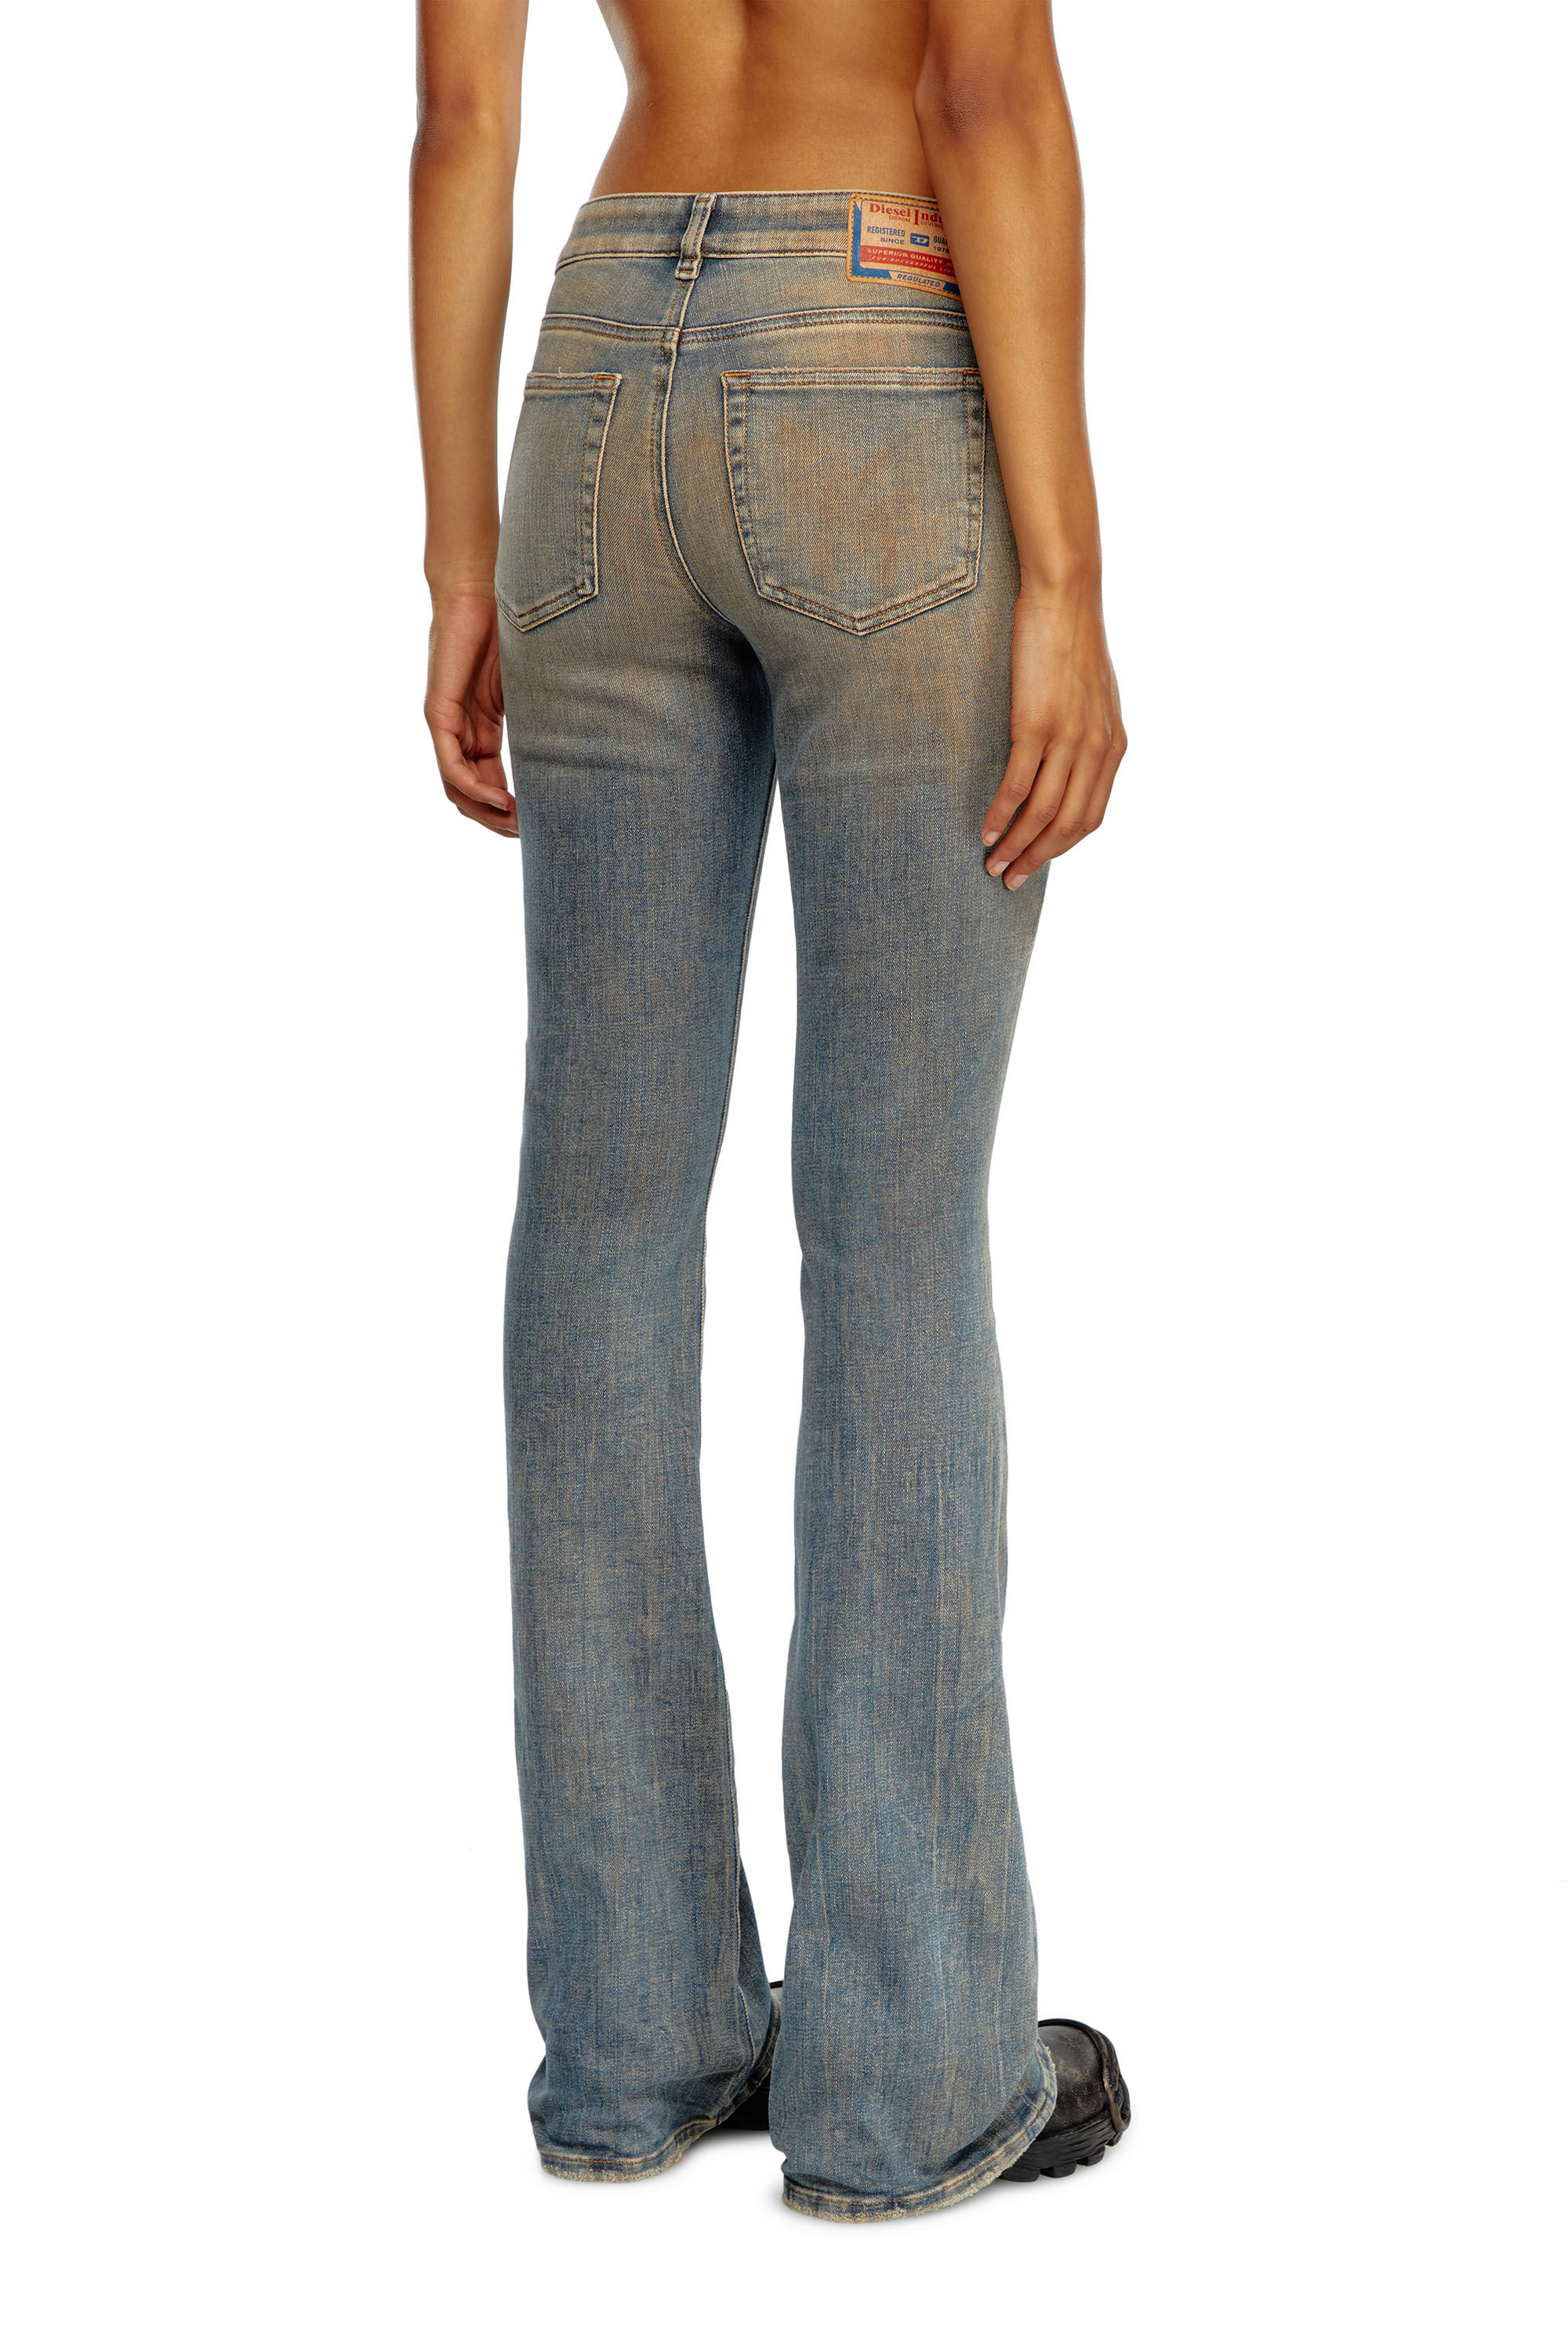 Diesel - Bootcut and Flare Jeans 1969 D-Ebbey 09J23, Mujer Bootcut y Flare Jeans - 1969 D-Ebbey in Azul marino - Image 4